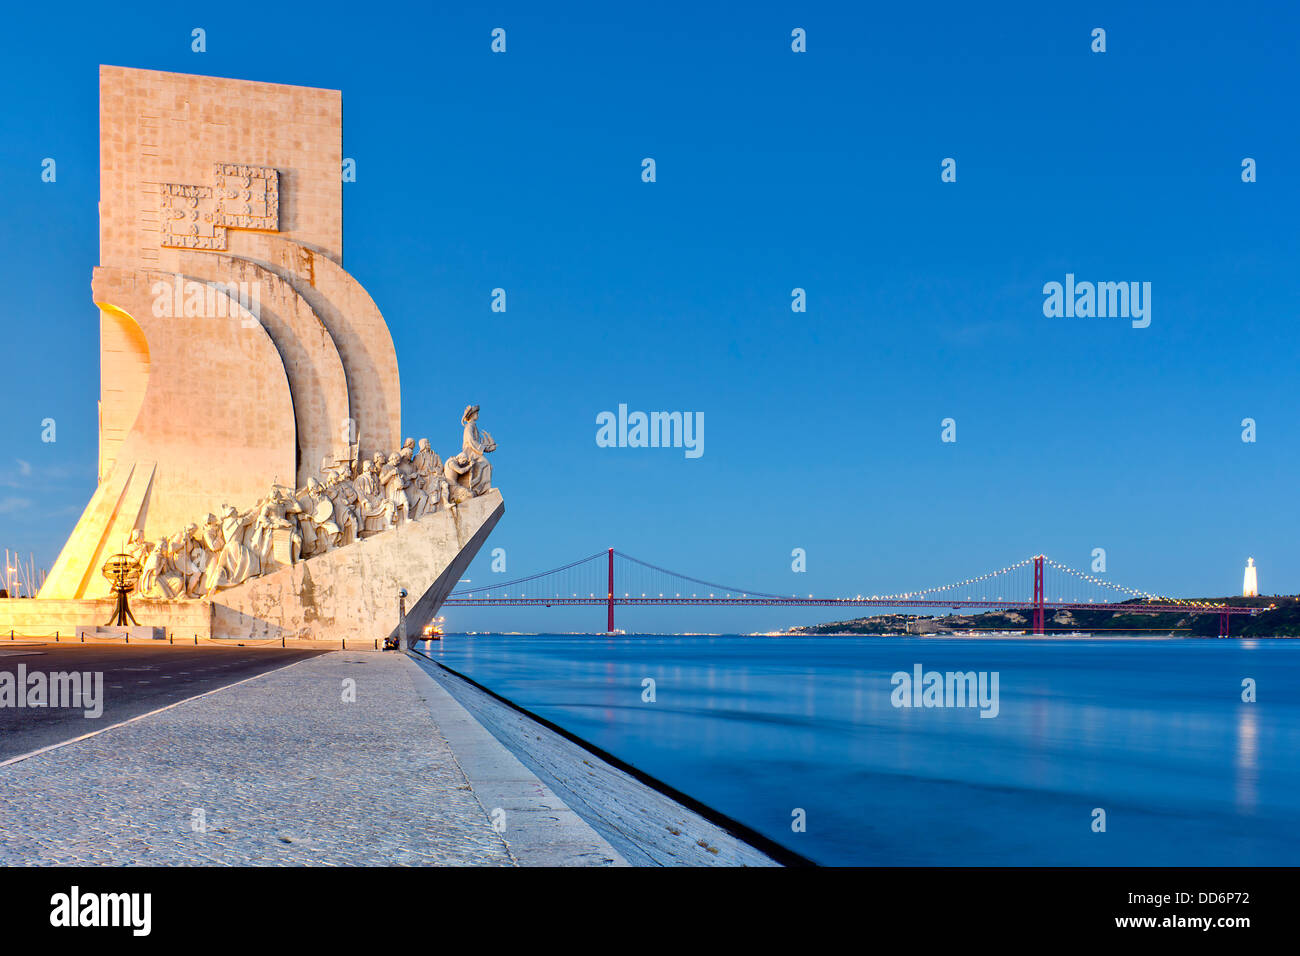 Monument to the Discoveries, Lisbon, Portugal, Europe Stock Photo